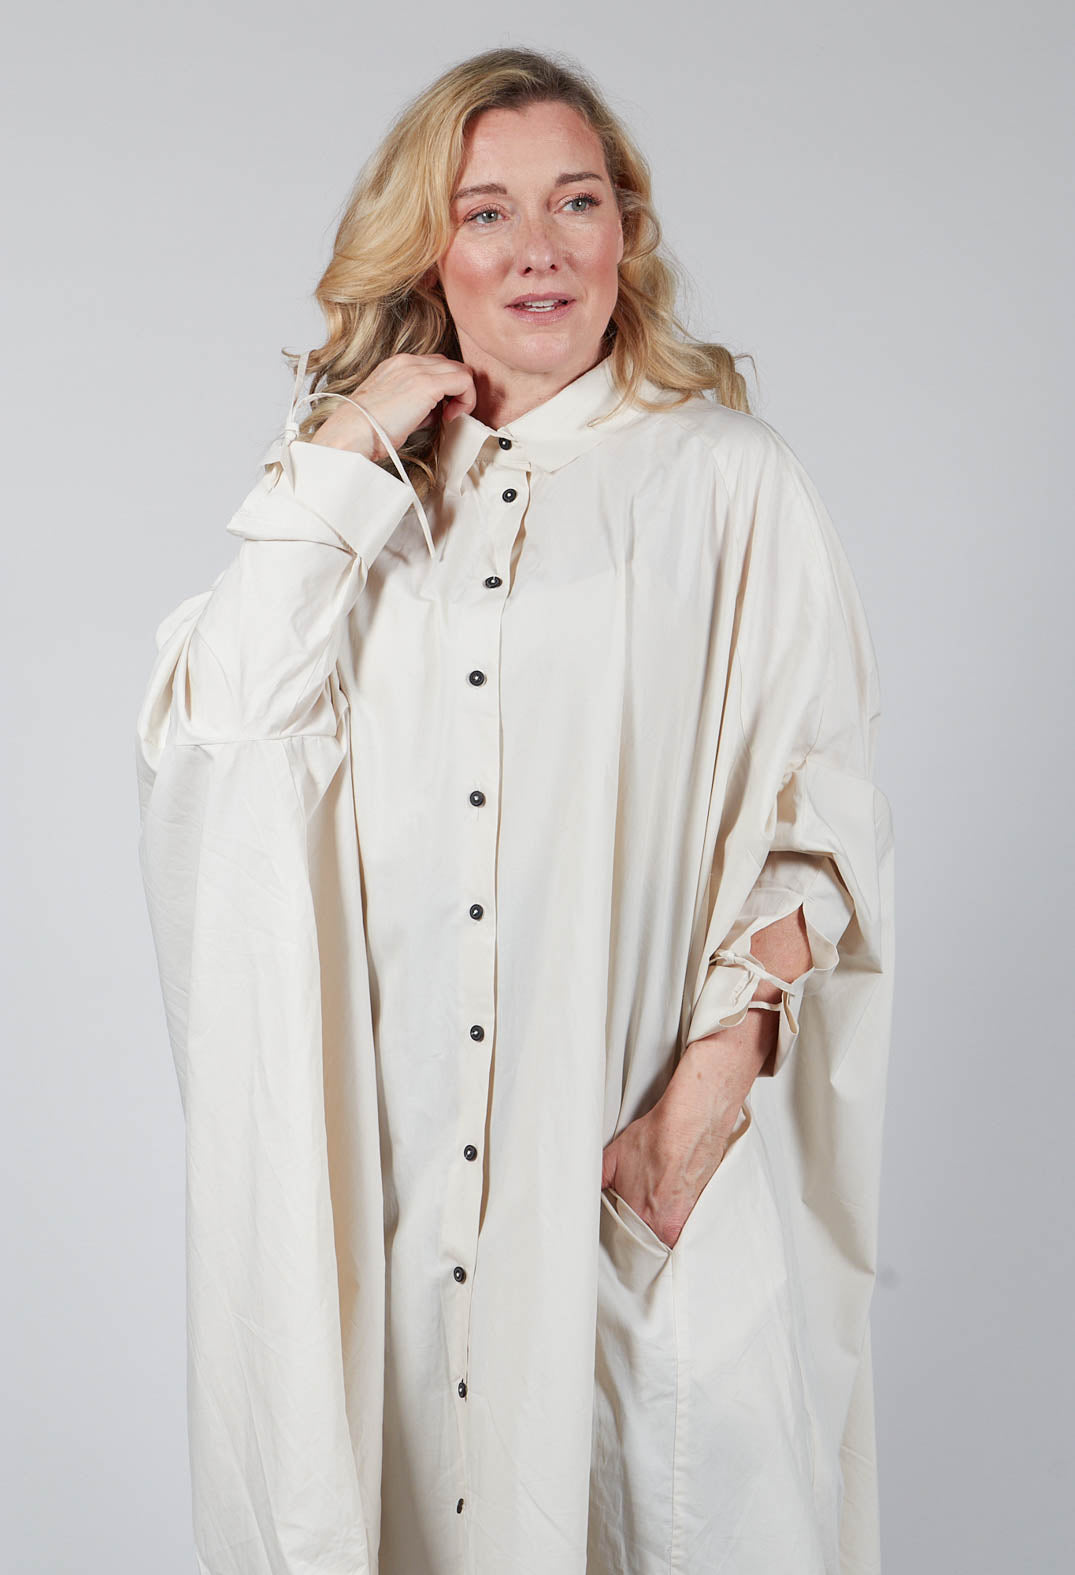 Oversized Batwing Shirt in Ivory